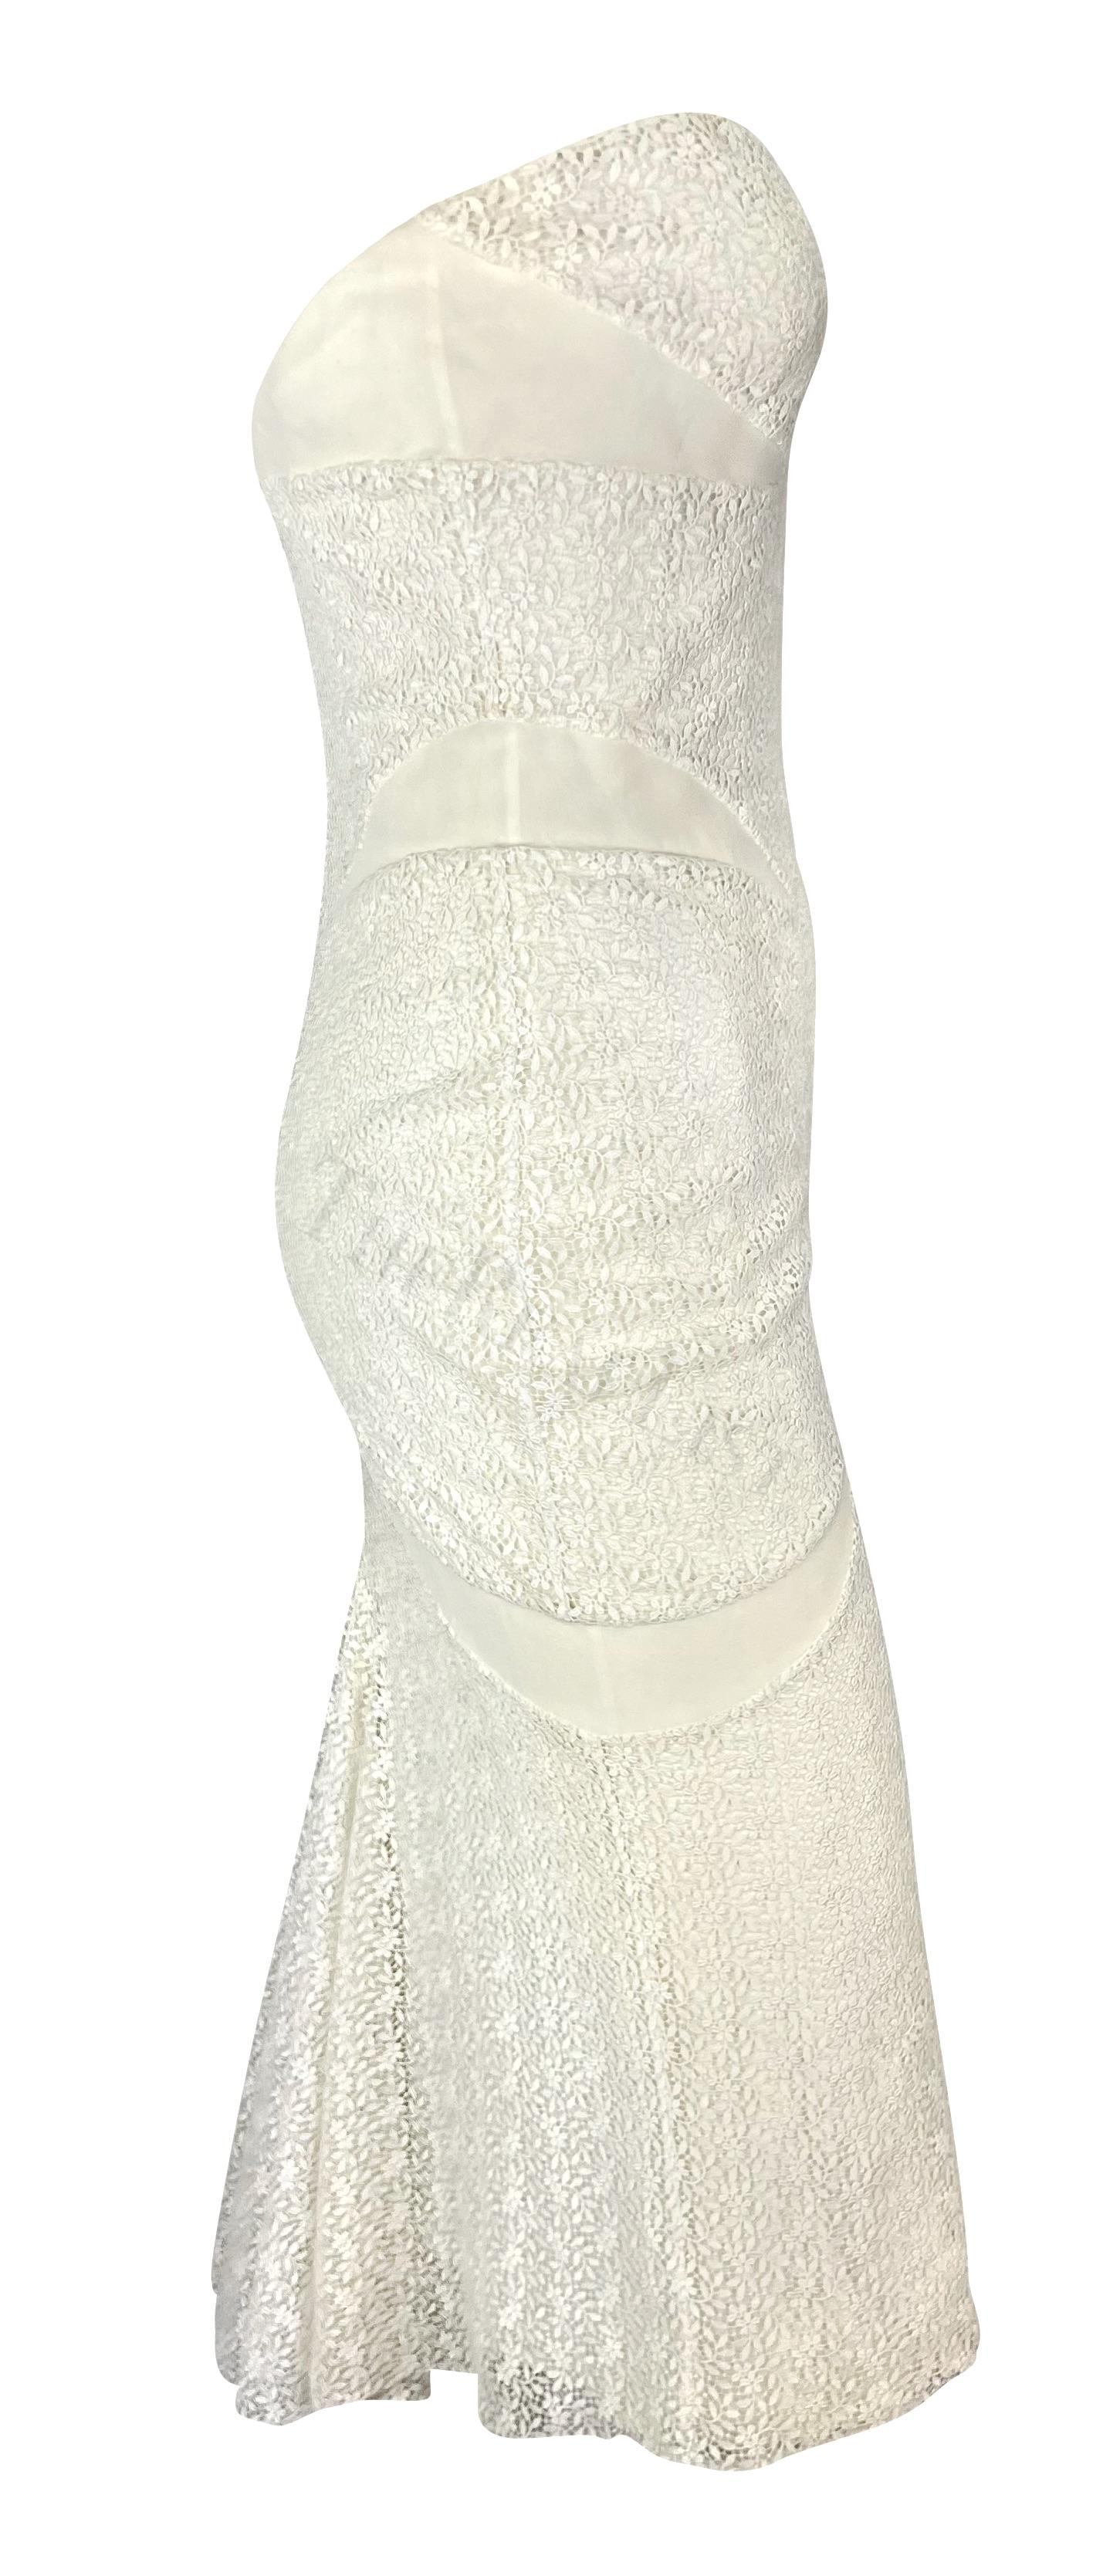 NWT S/S 2002 Gianni Versace by Donatella White Floral Lace Strapless Dress For Sale 3